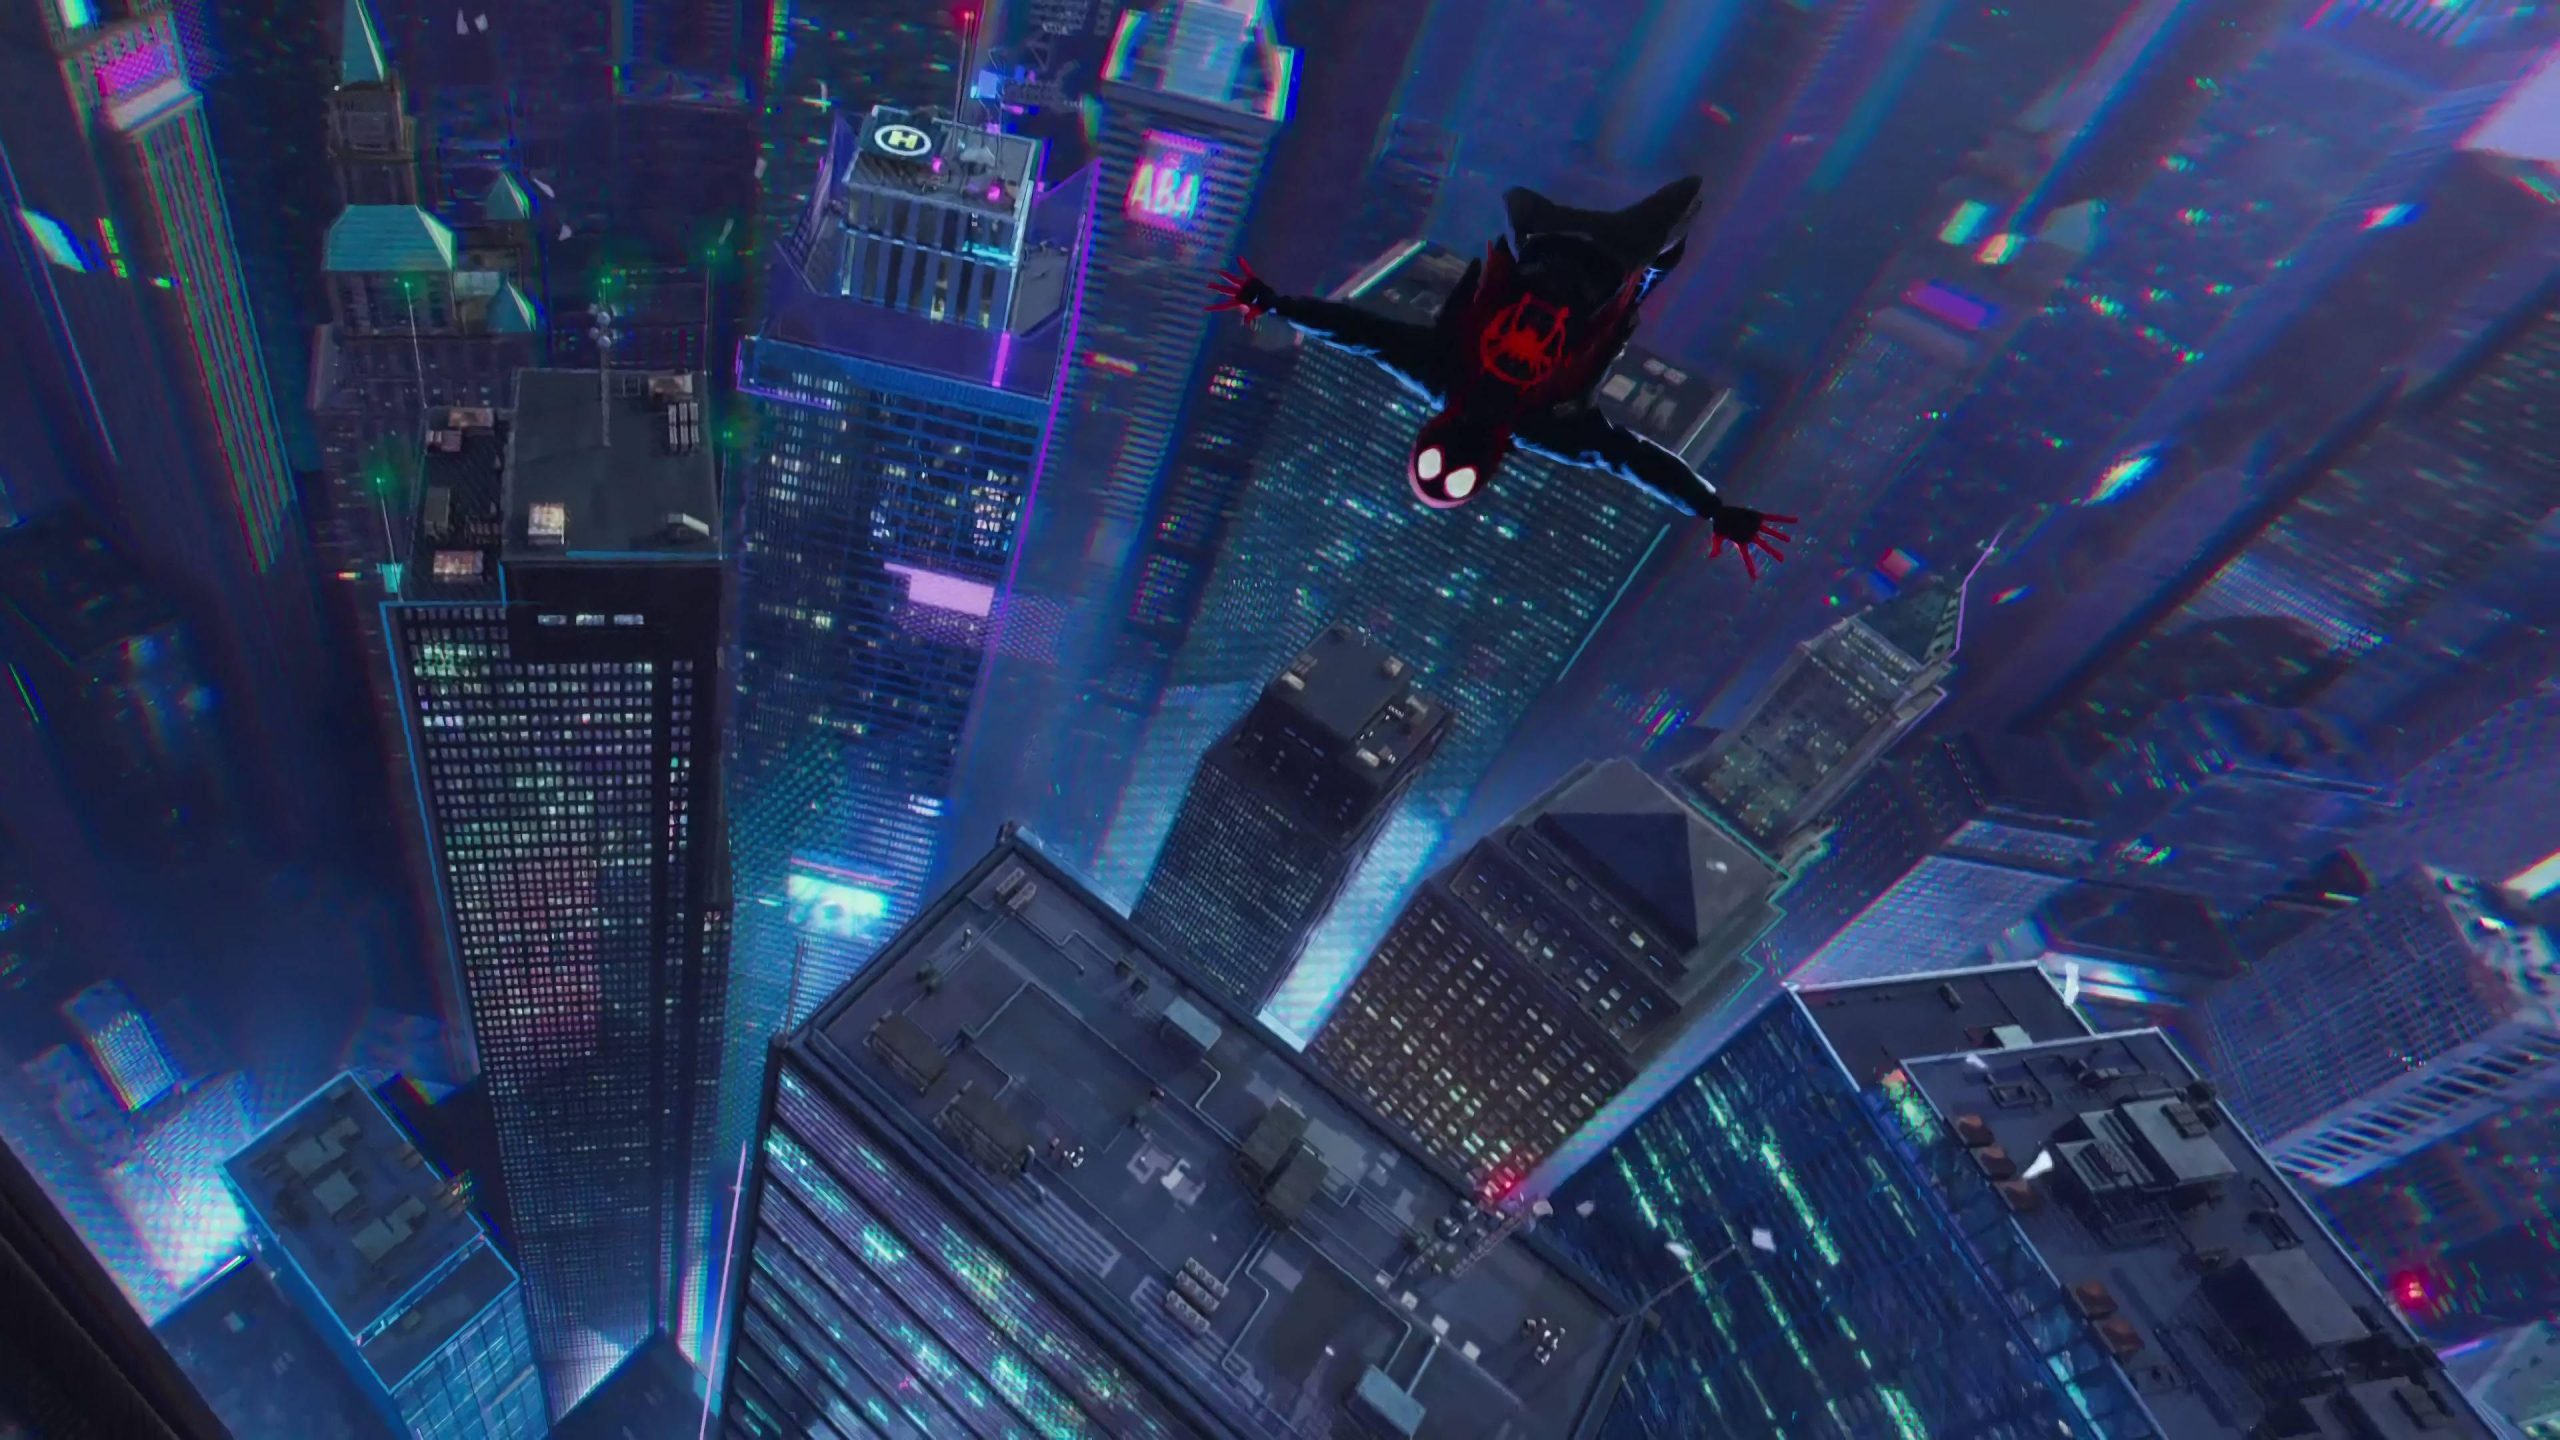 Miles Morales Leap Of Faith Wallpaper Download, Miles Morales Leap Of Faith, Movies